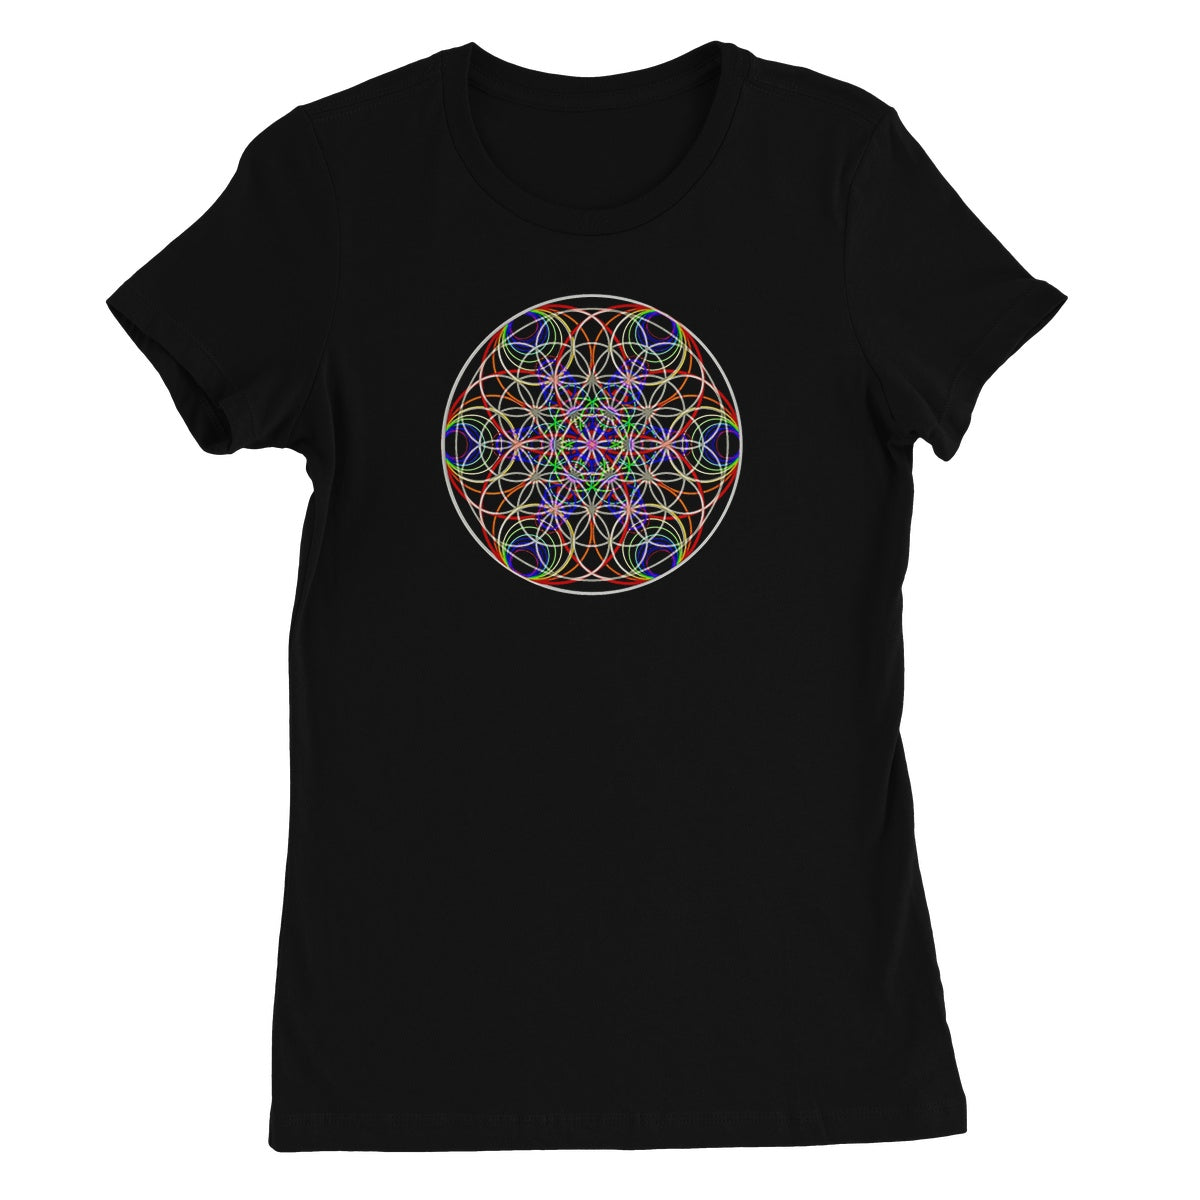 The Sound of the Flower of Life Women's Favourite T-Shirt